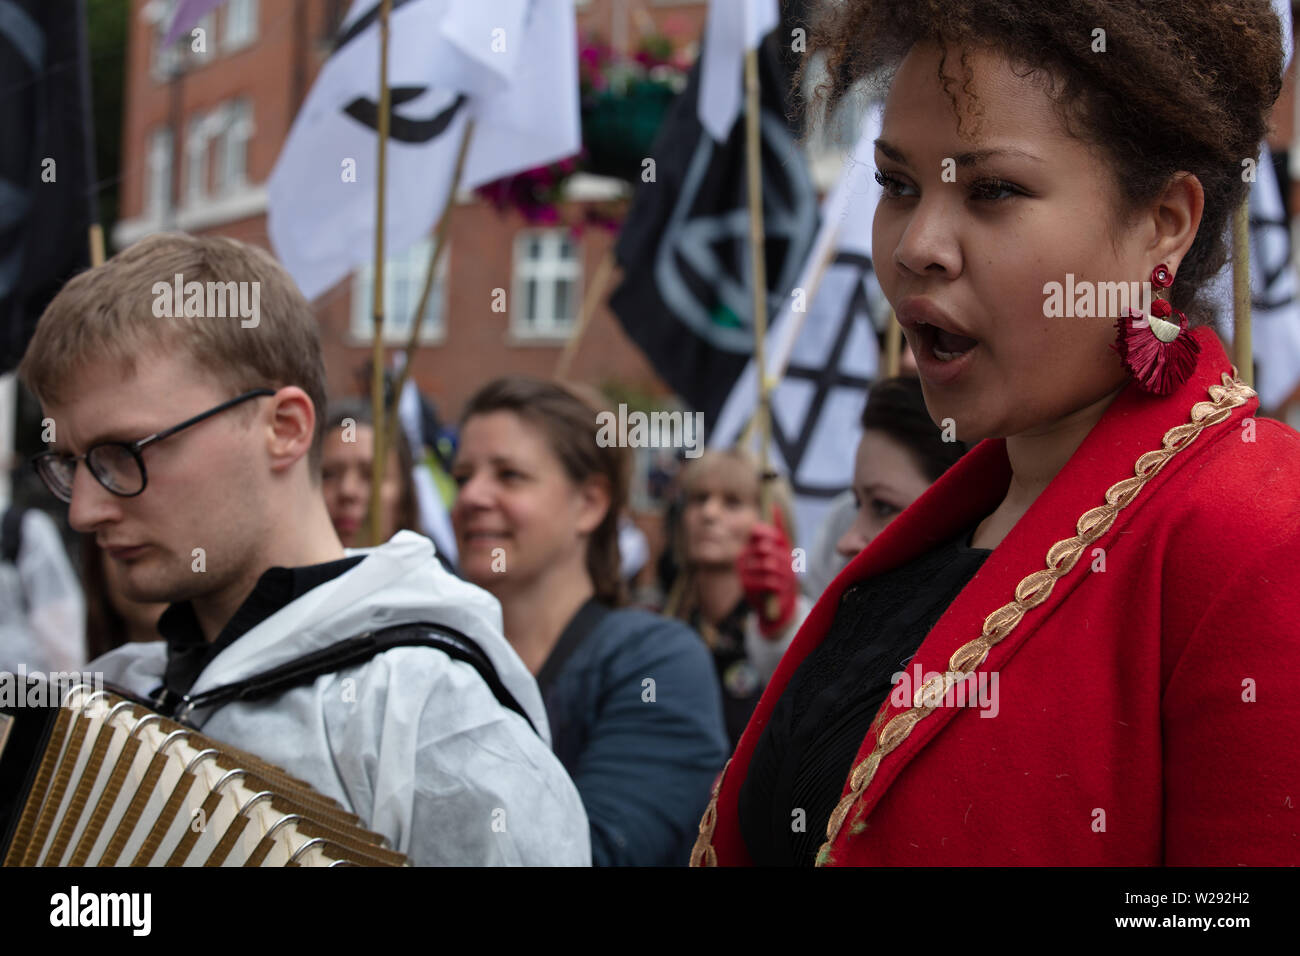 London, UK. 2nd July 2019. Extinction Rebellion Arts and Culture Group creating a silent procession to and theatre in front of several fossil fuel companies. The protest play is based on Bizet's opera Carmen, with real life actors and an opera singer. Pictured: opera singer Simone Ibbett-Brown sings a song from the opera Carmen during the protest, the text adapted for the occasion. Credit: Joe Kuis / Alamy News Stock Photo